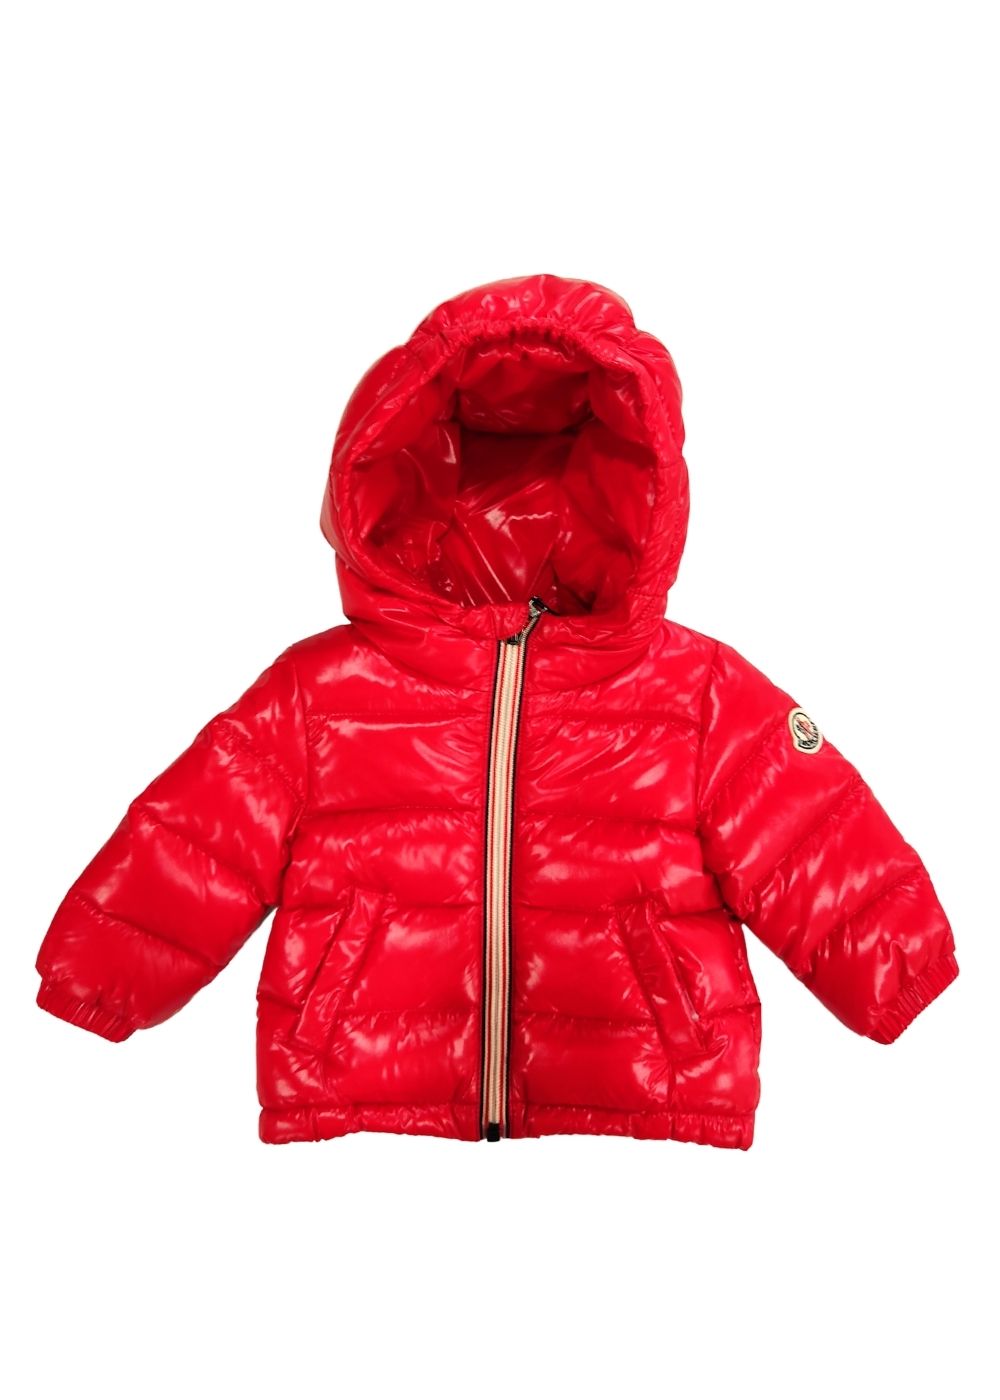 Featured image for “MONCLER AUBERT ROSSO”